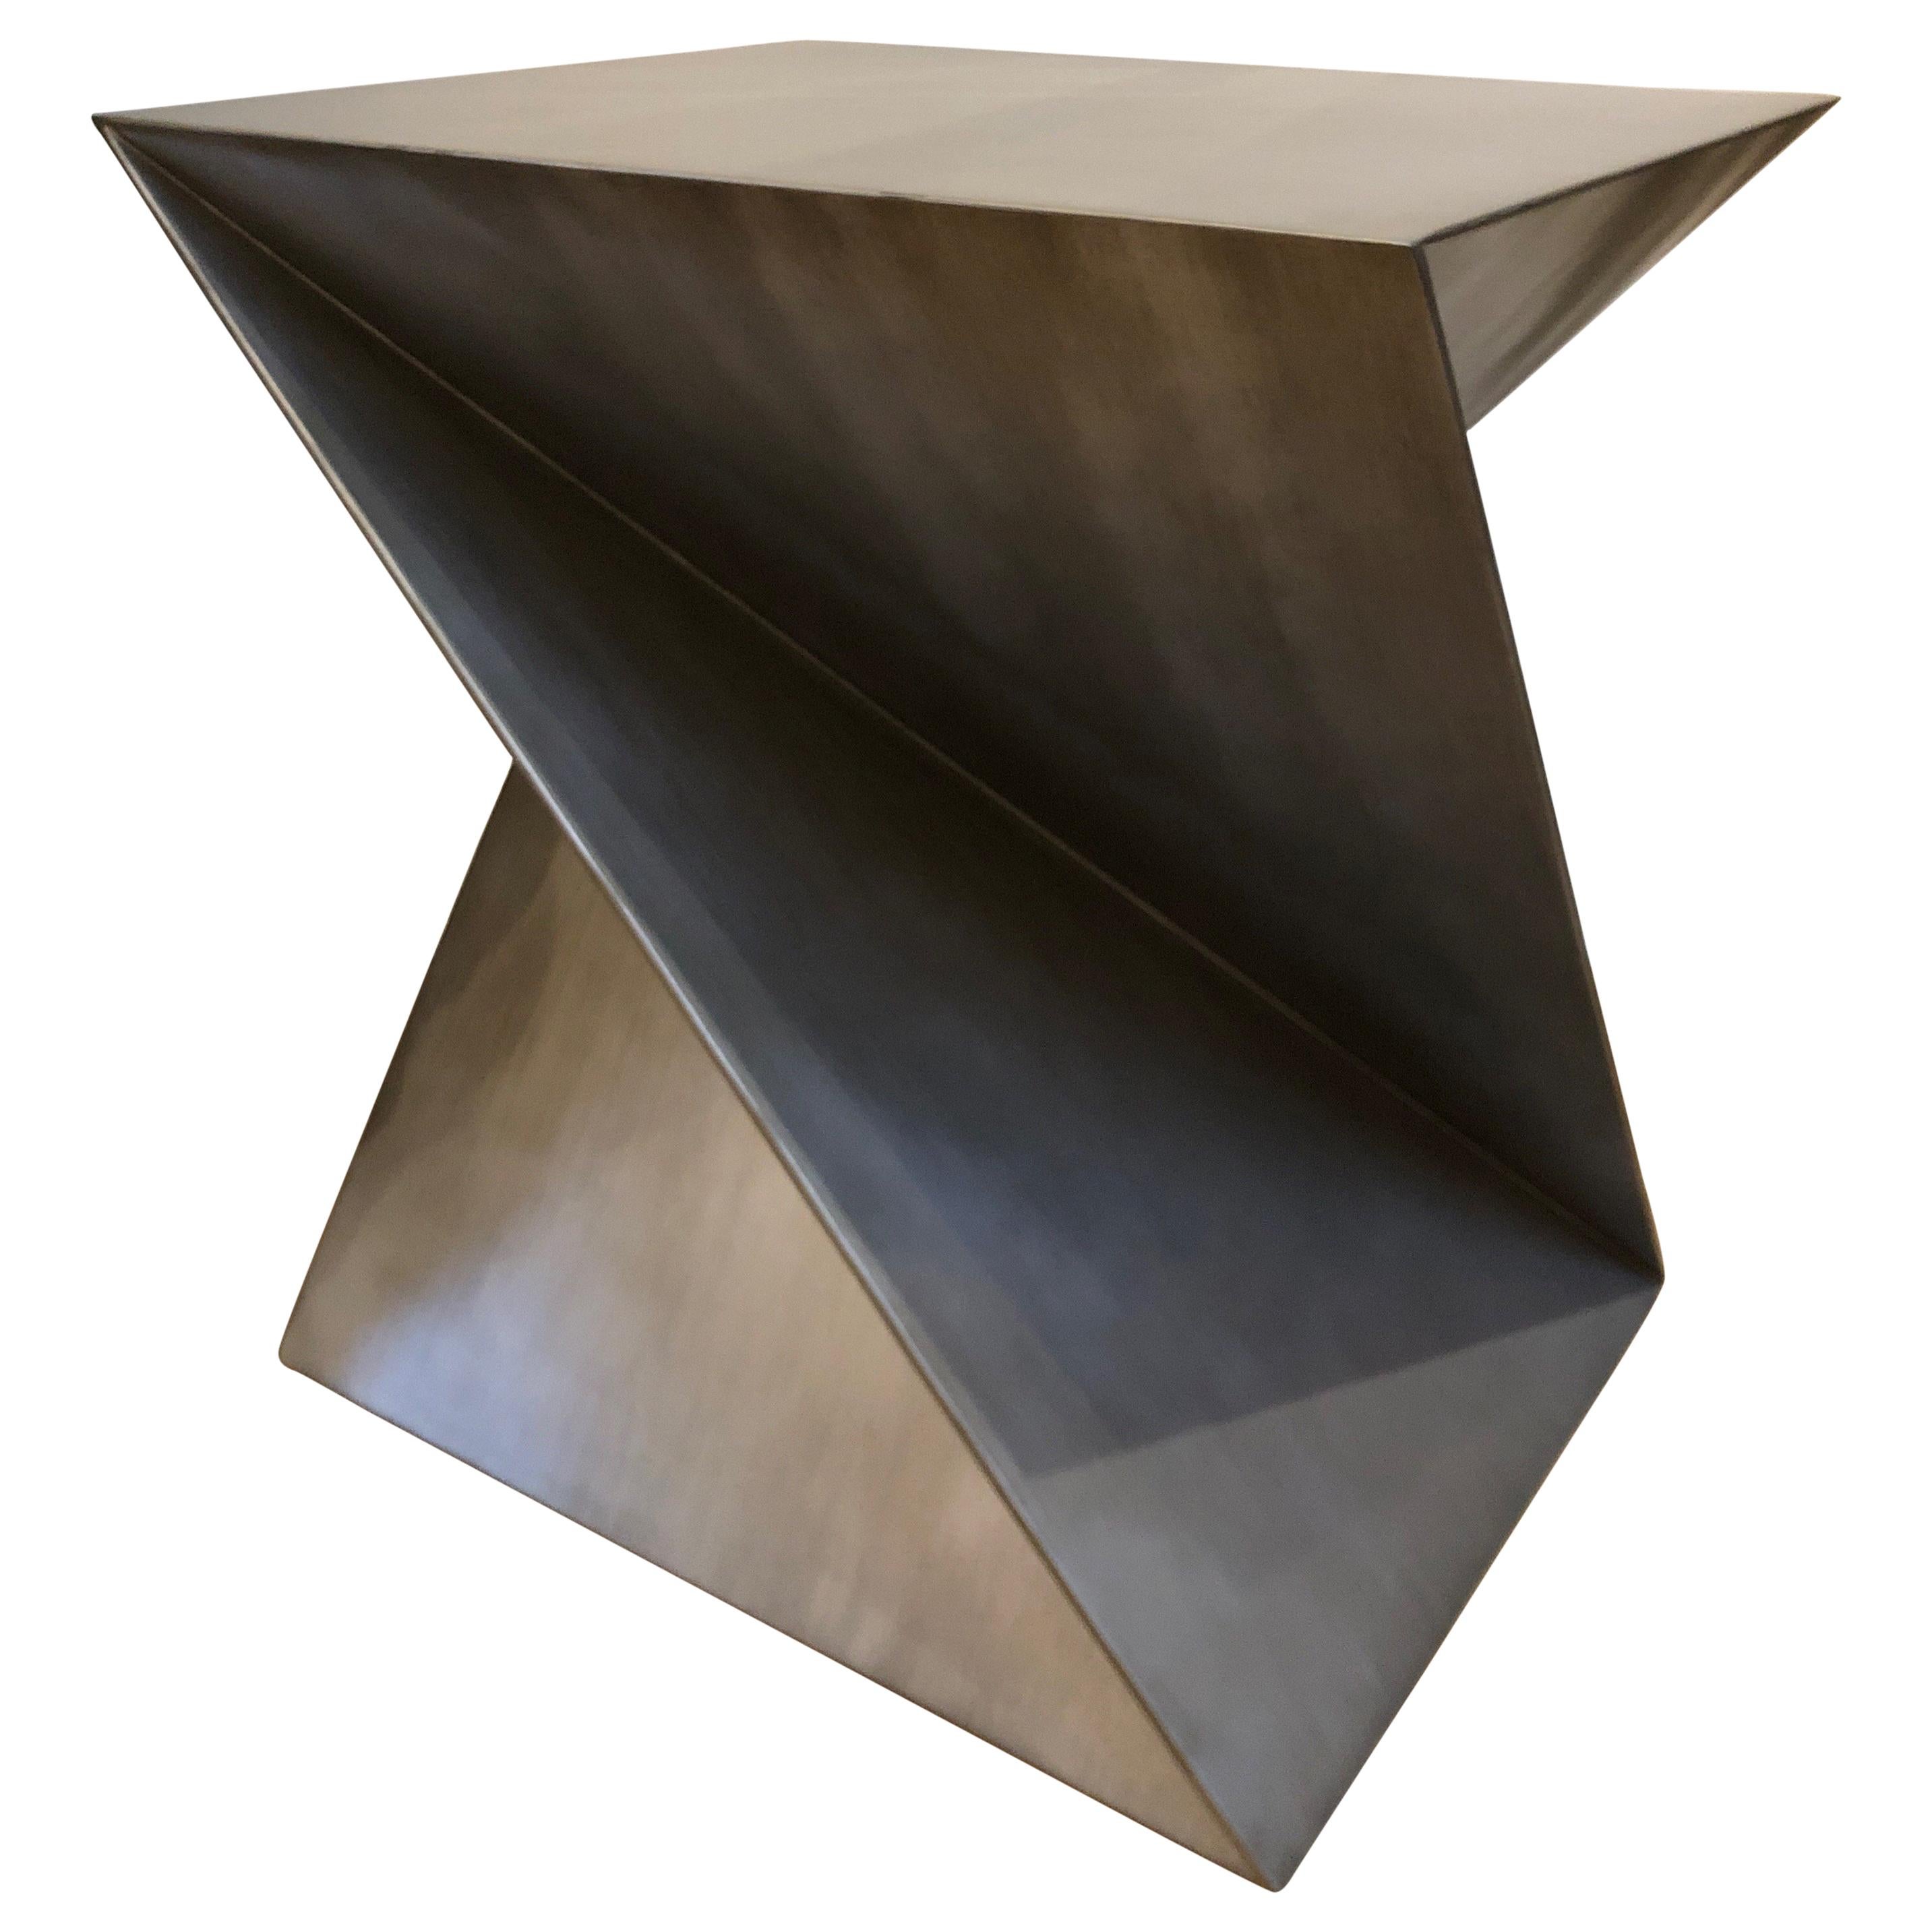 Contemporary Geometric Side Table, Style of Mathieu Mategot